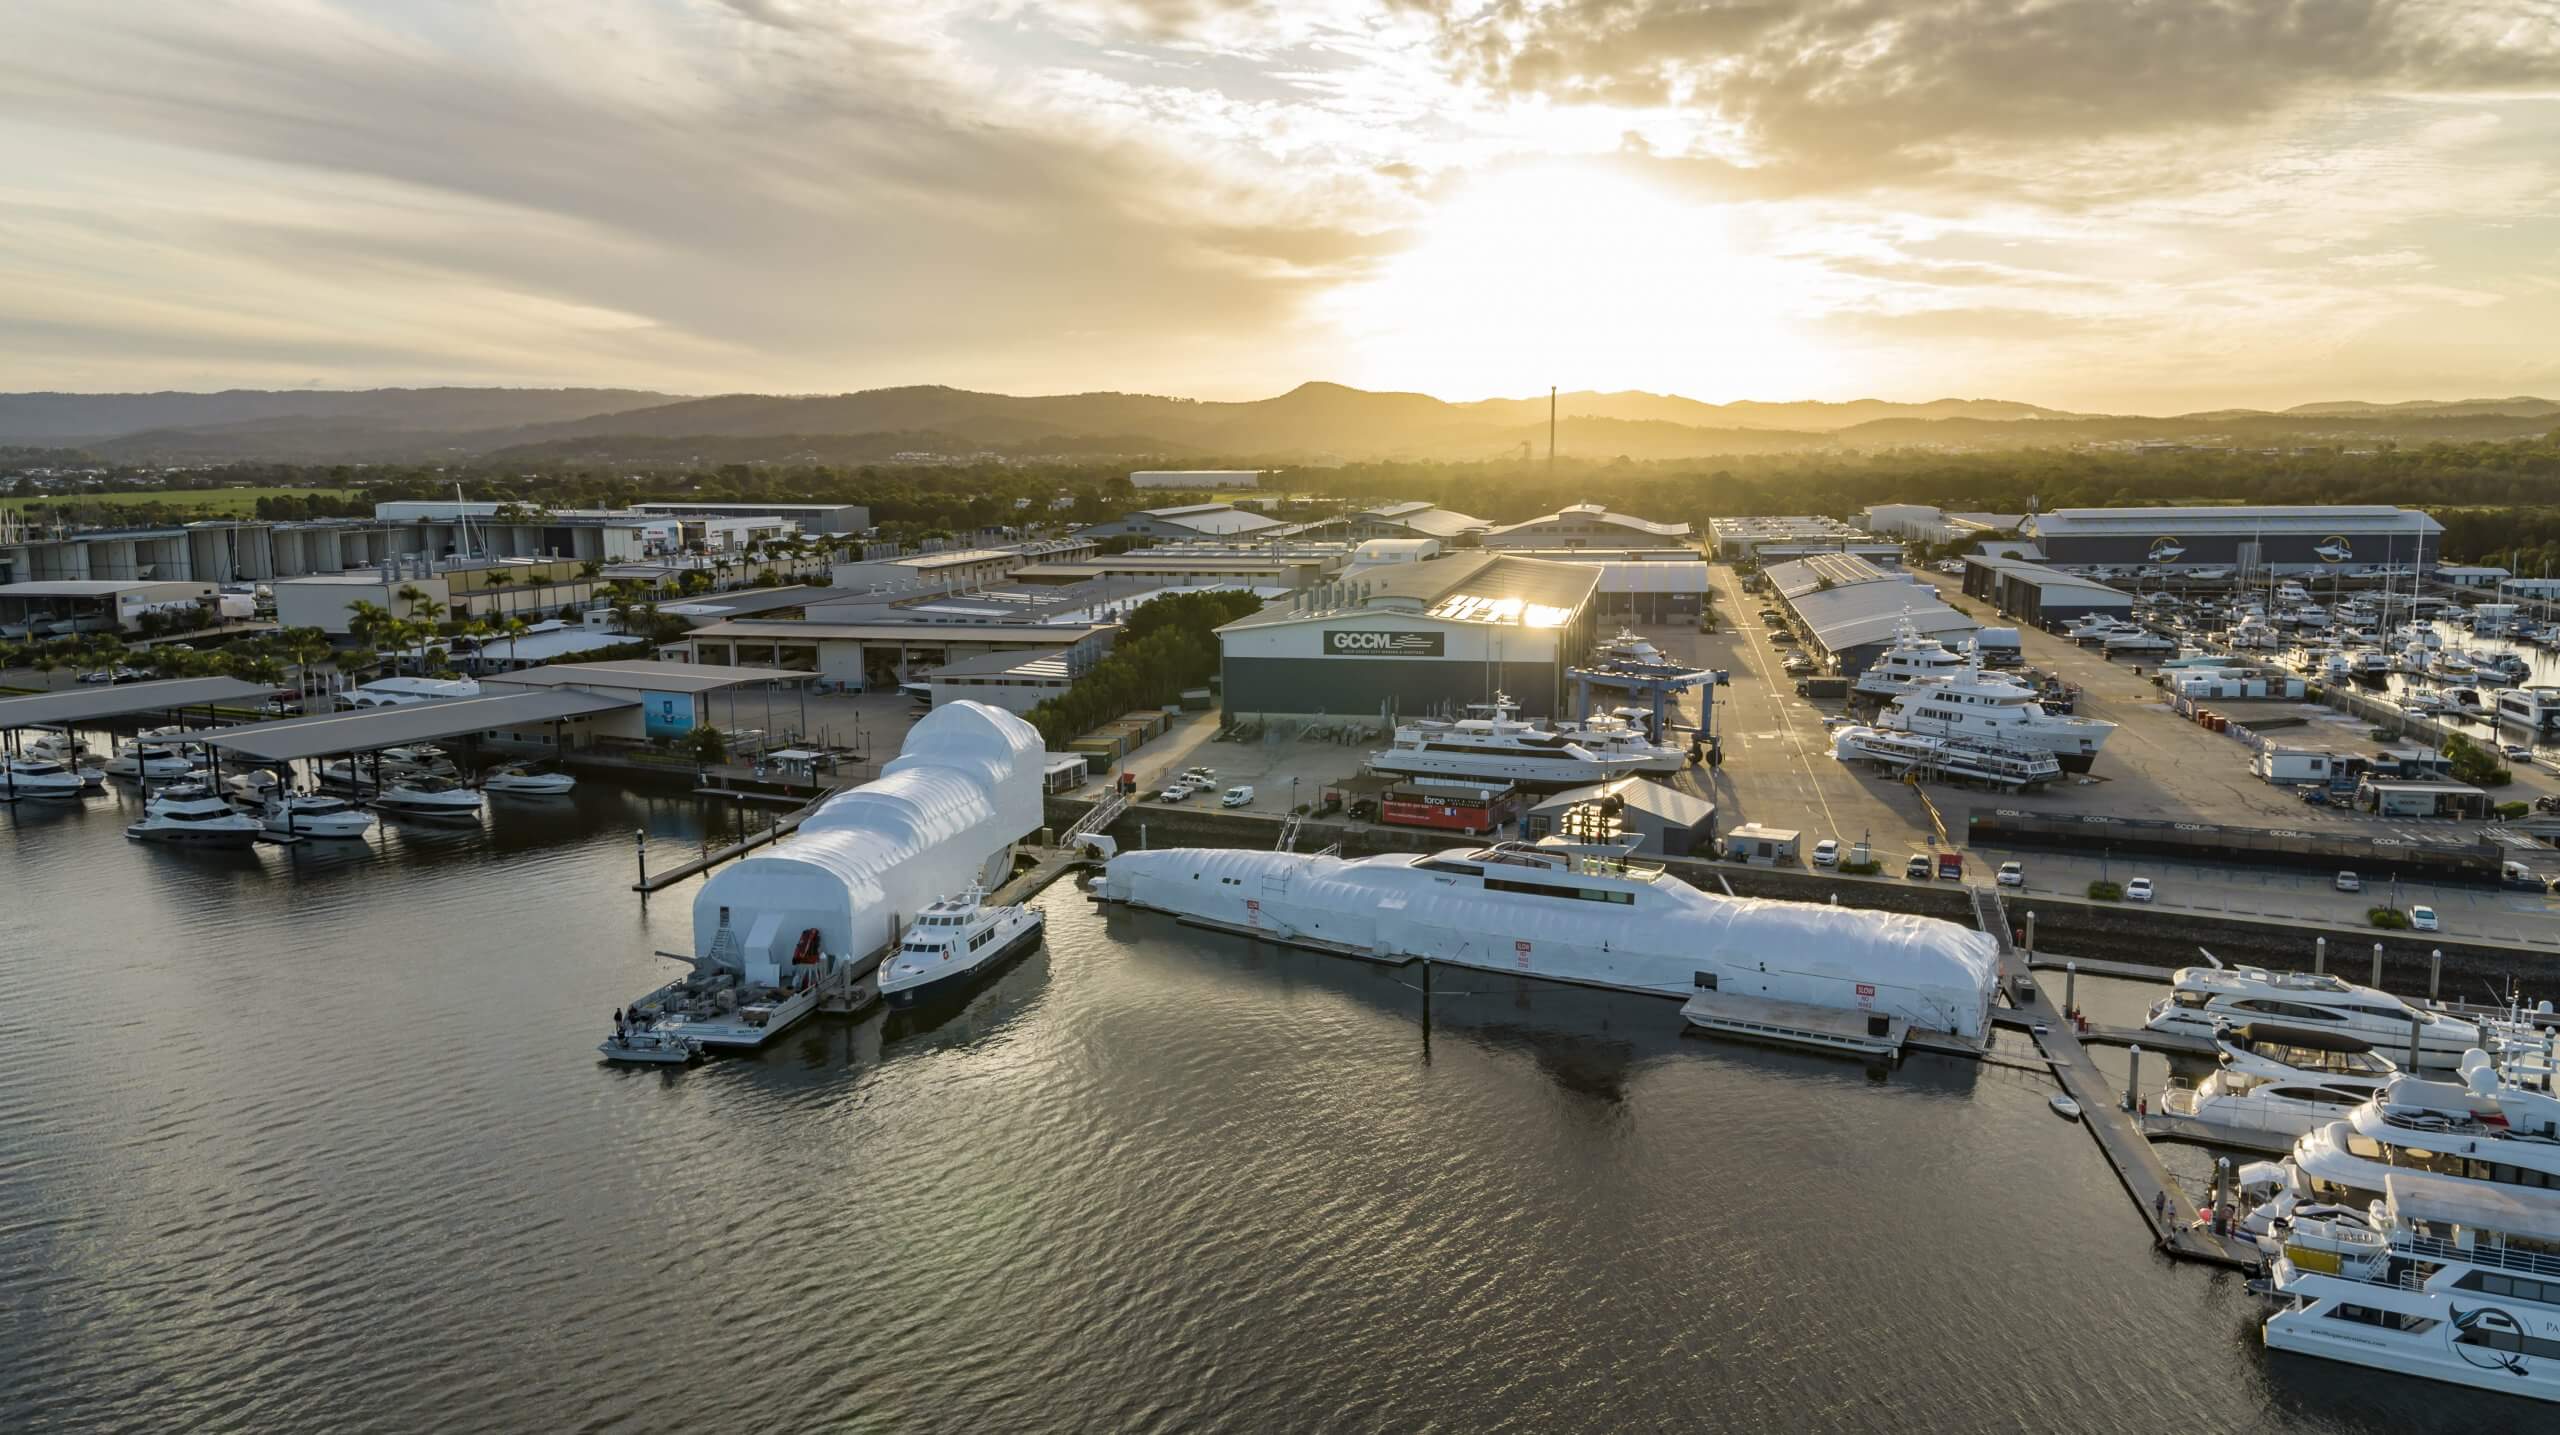 GCCM PIONEERS AUSTRALIAN ONWATER REFIT CAPABILITY WITH SURI AND DRAGONFLY